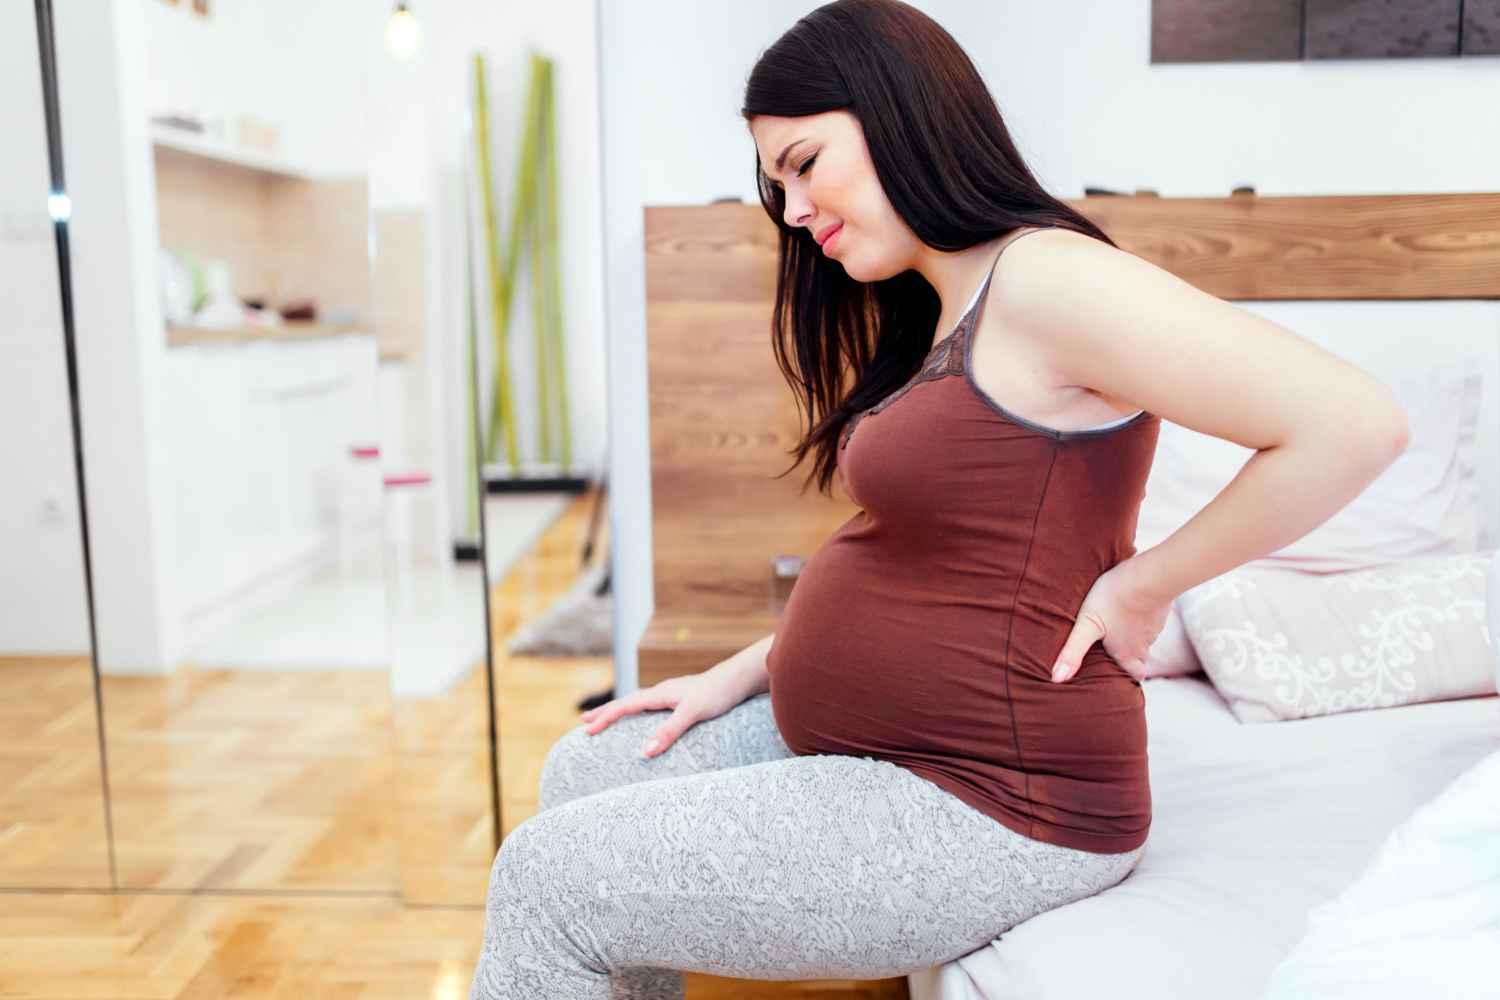 Body Aches and Pains During Pregnancy – Causes and Tips to Deal With it